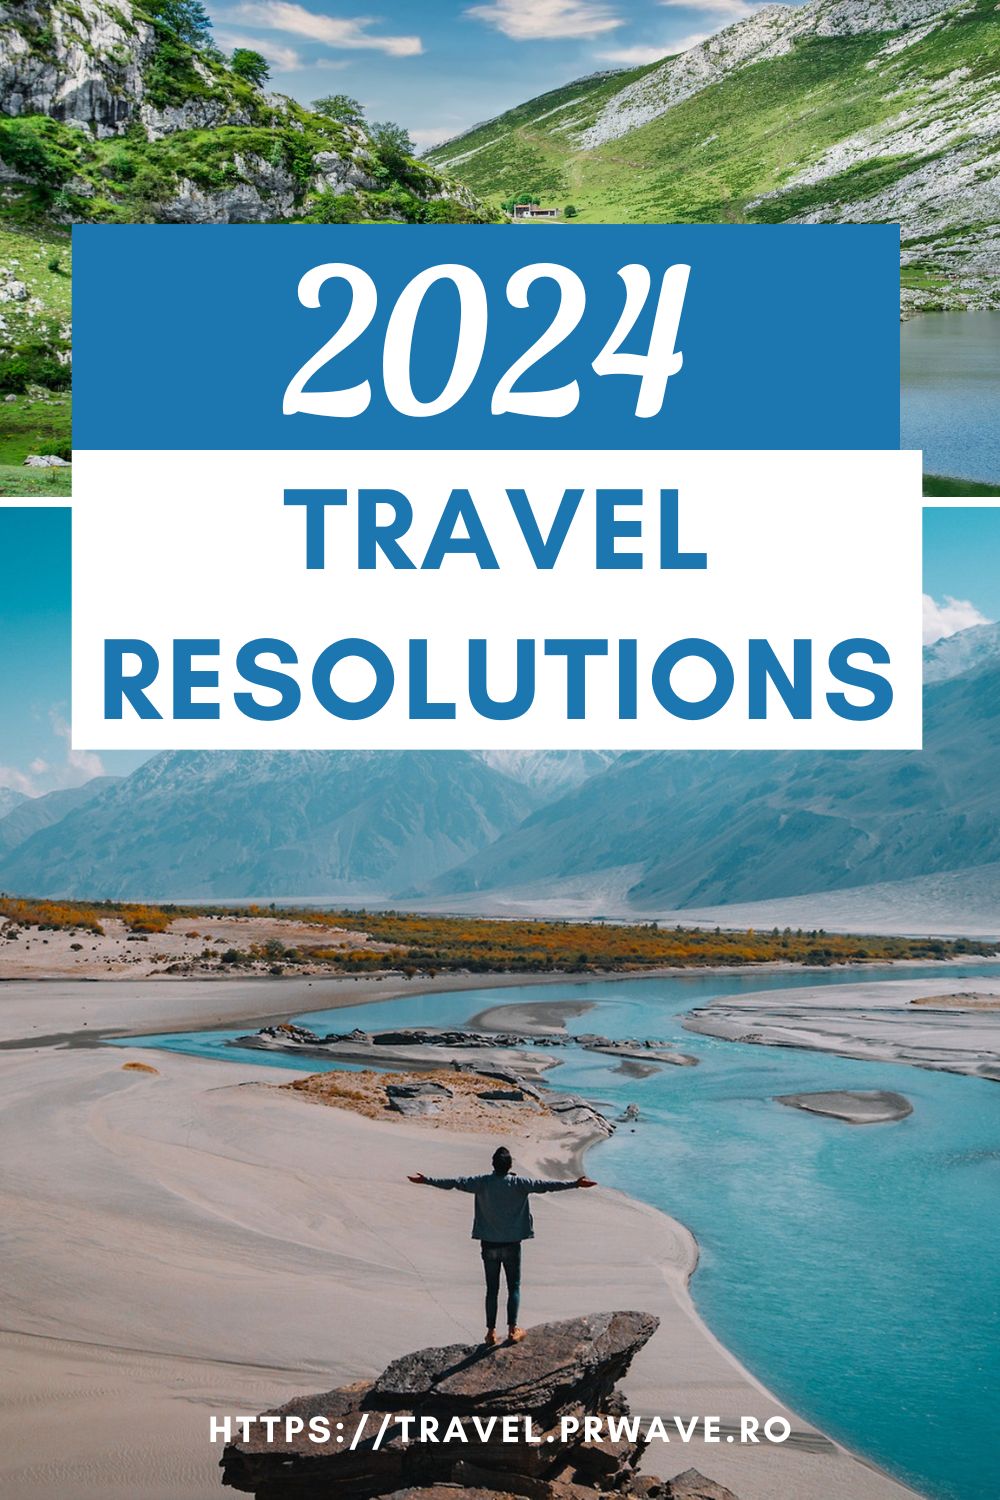 Manifest Your Wildest Travel Dreams: 2024 Travel Resolutions. Discover many 2024 travel goals that are easy to implement. Travel resolutions for 2024 for all preferences and budgets! #happynewyear #travelresolutions #newyearresolutions #travelgoals #newyeartravelgoals